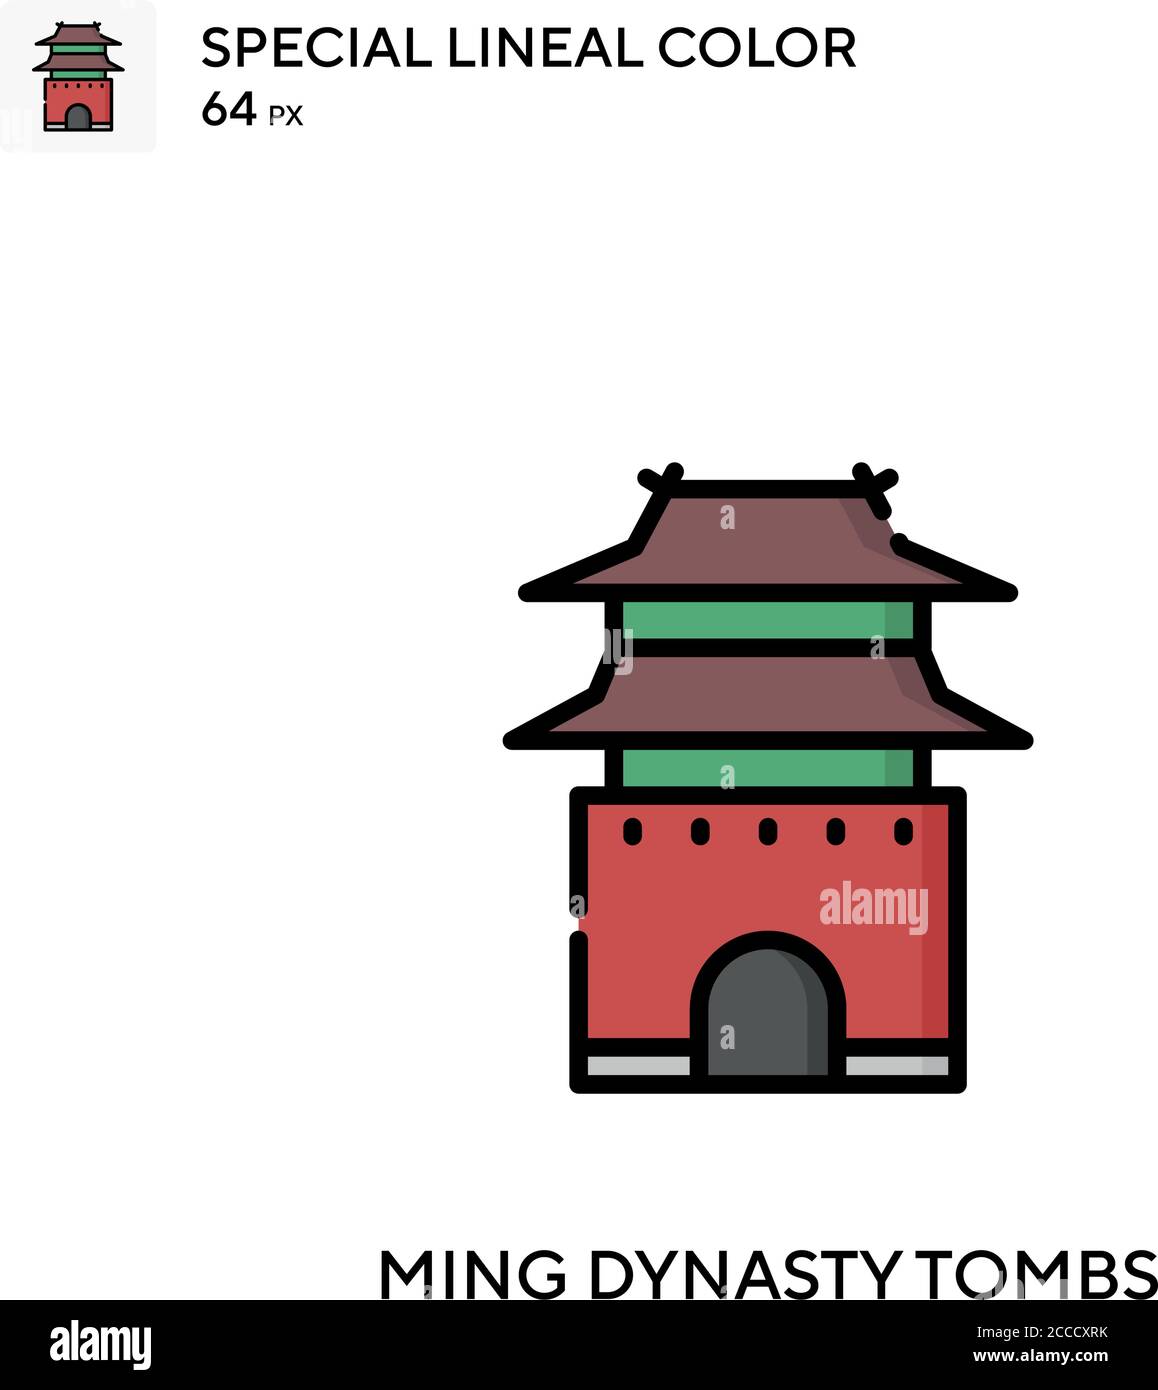 Ming dynasty tombs Special lineal color icon. Illustration symbol design template for web mobile UI element. Perfect color modern pictogram on editabl Stock Vector